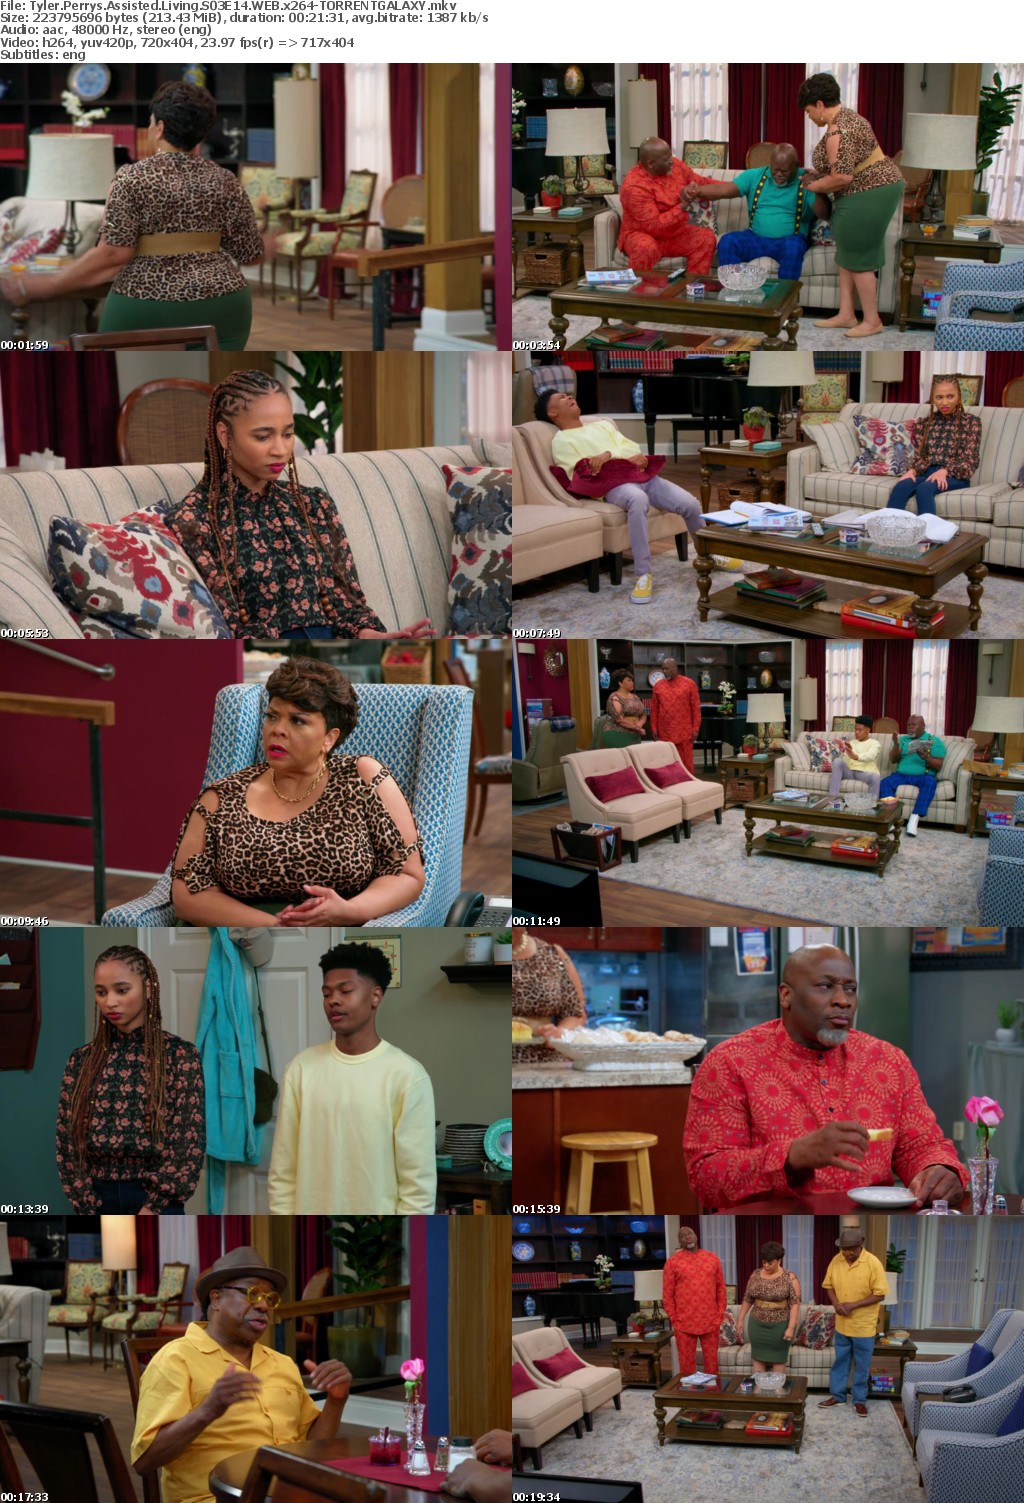 Tyler Perrys Assisted Living S03E14 WEB x264-GALAXY